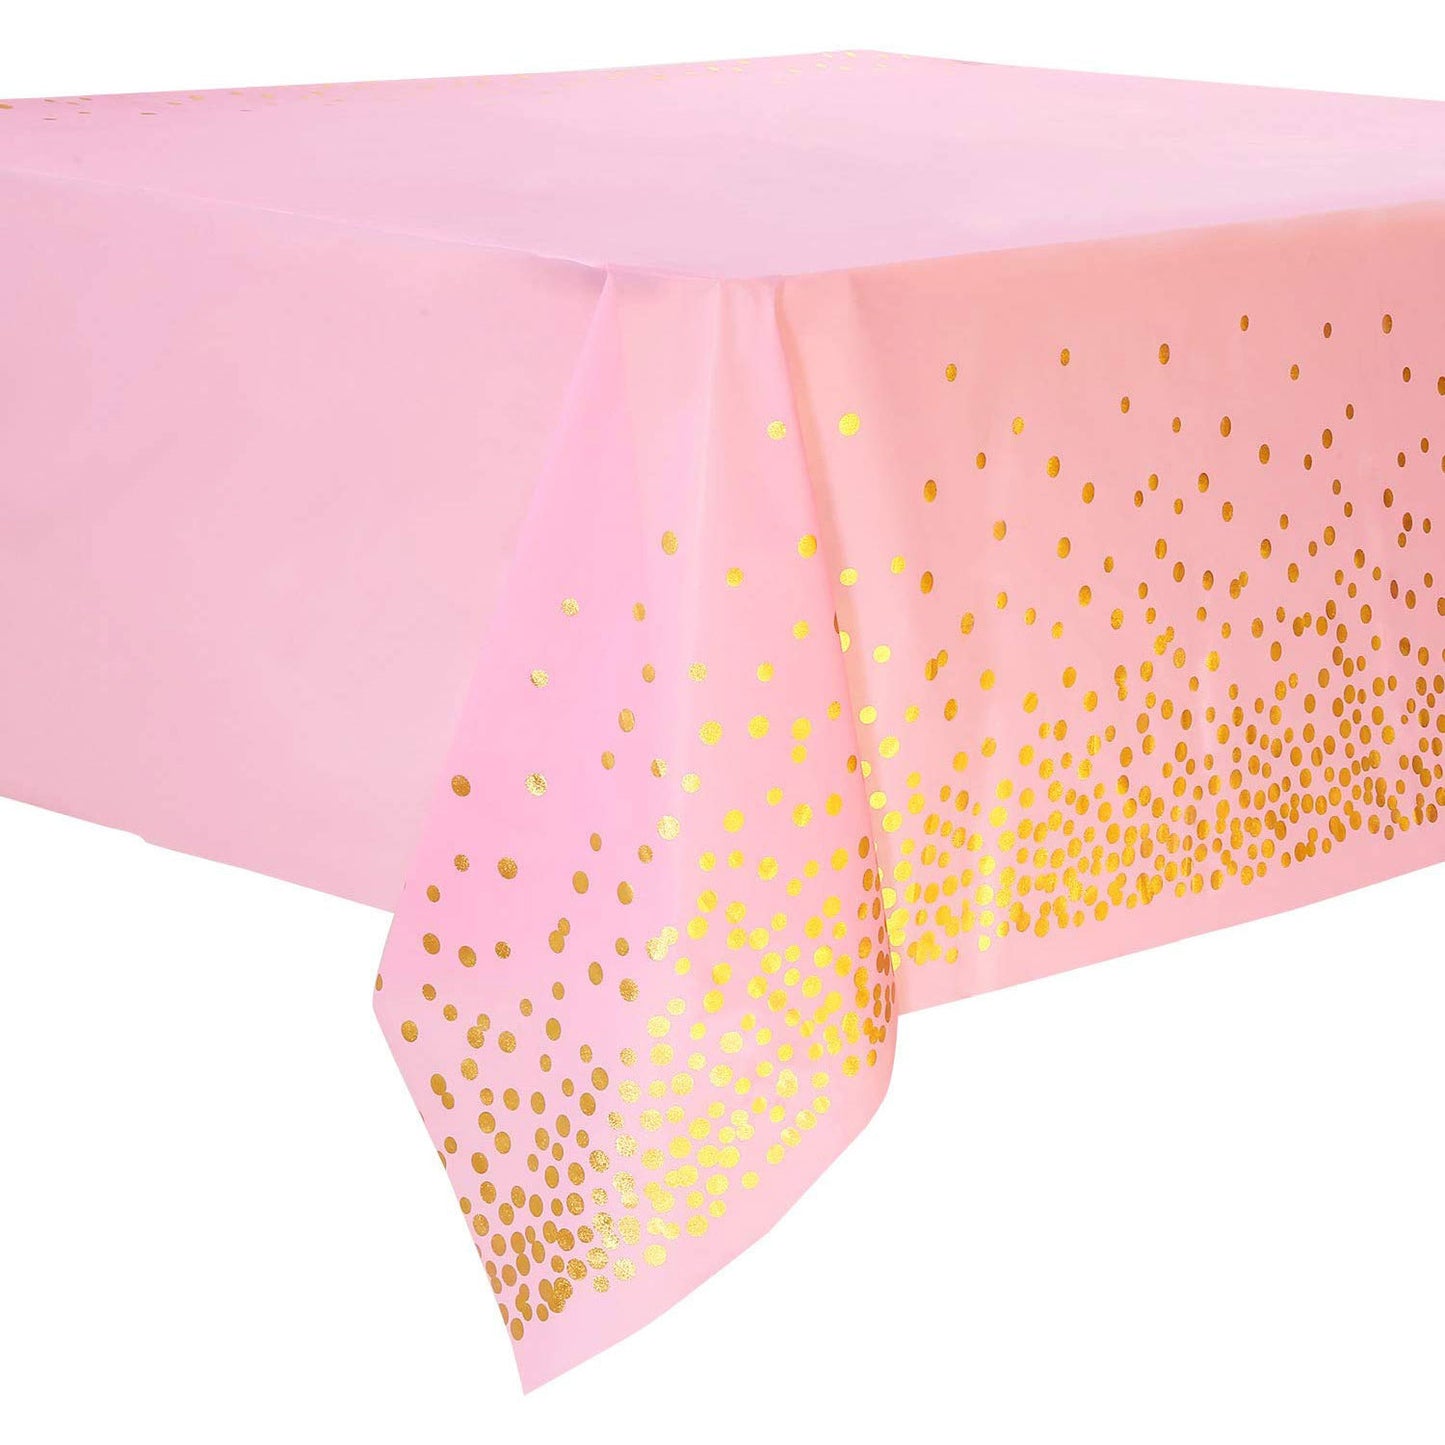 Lovely Baby Pink Table Cover for the sweet baby party. The golden dots simply enhance the look with elegance.